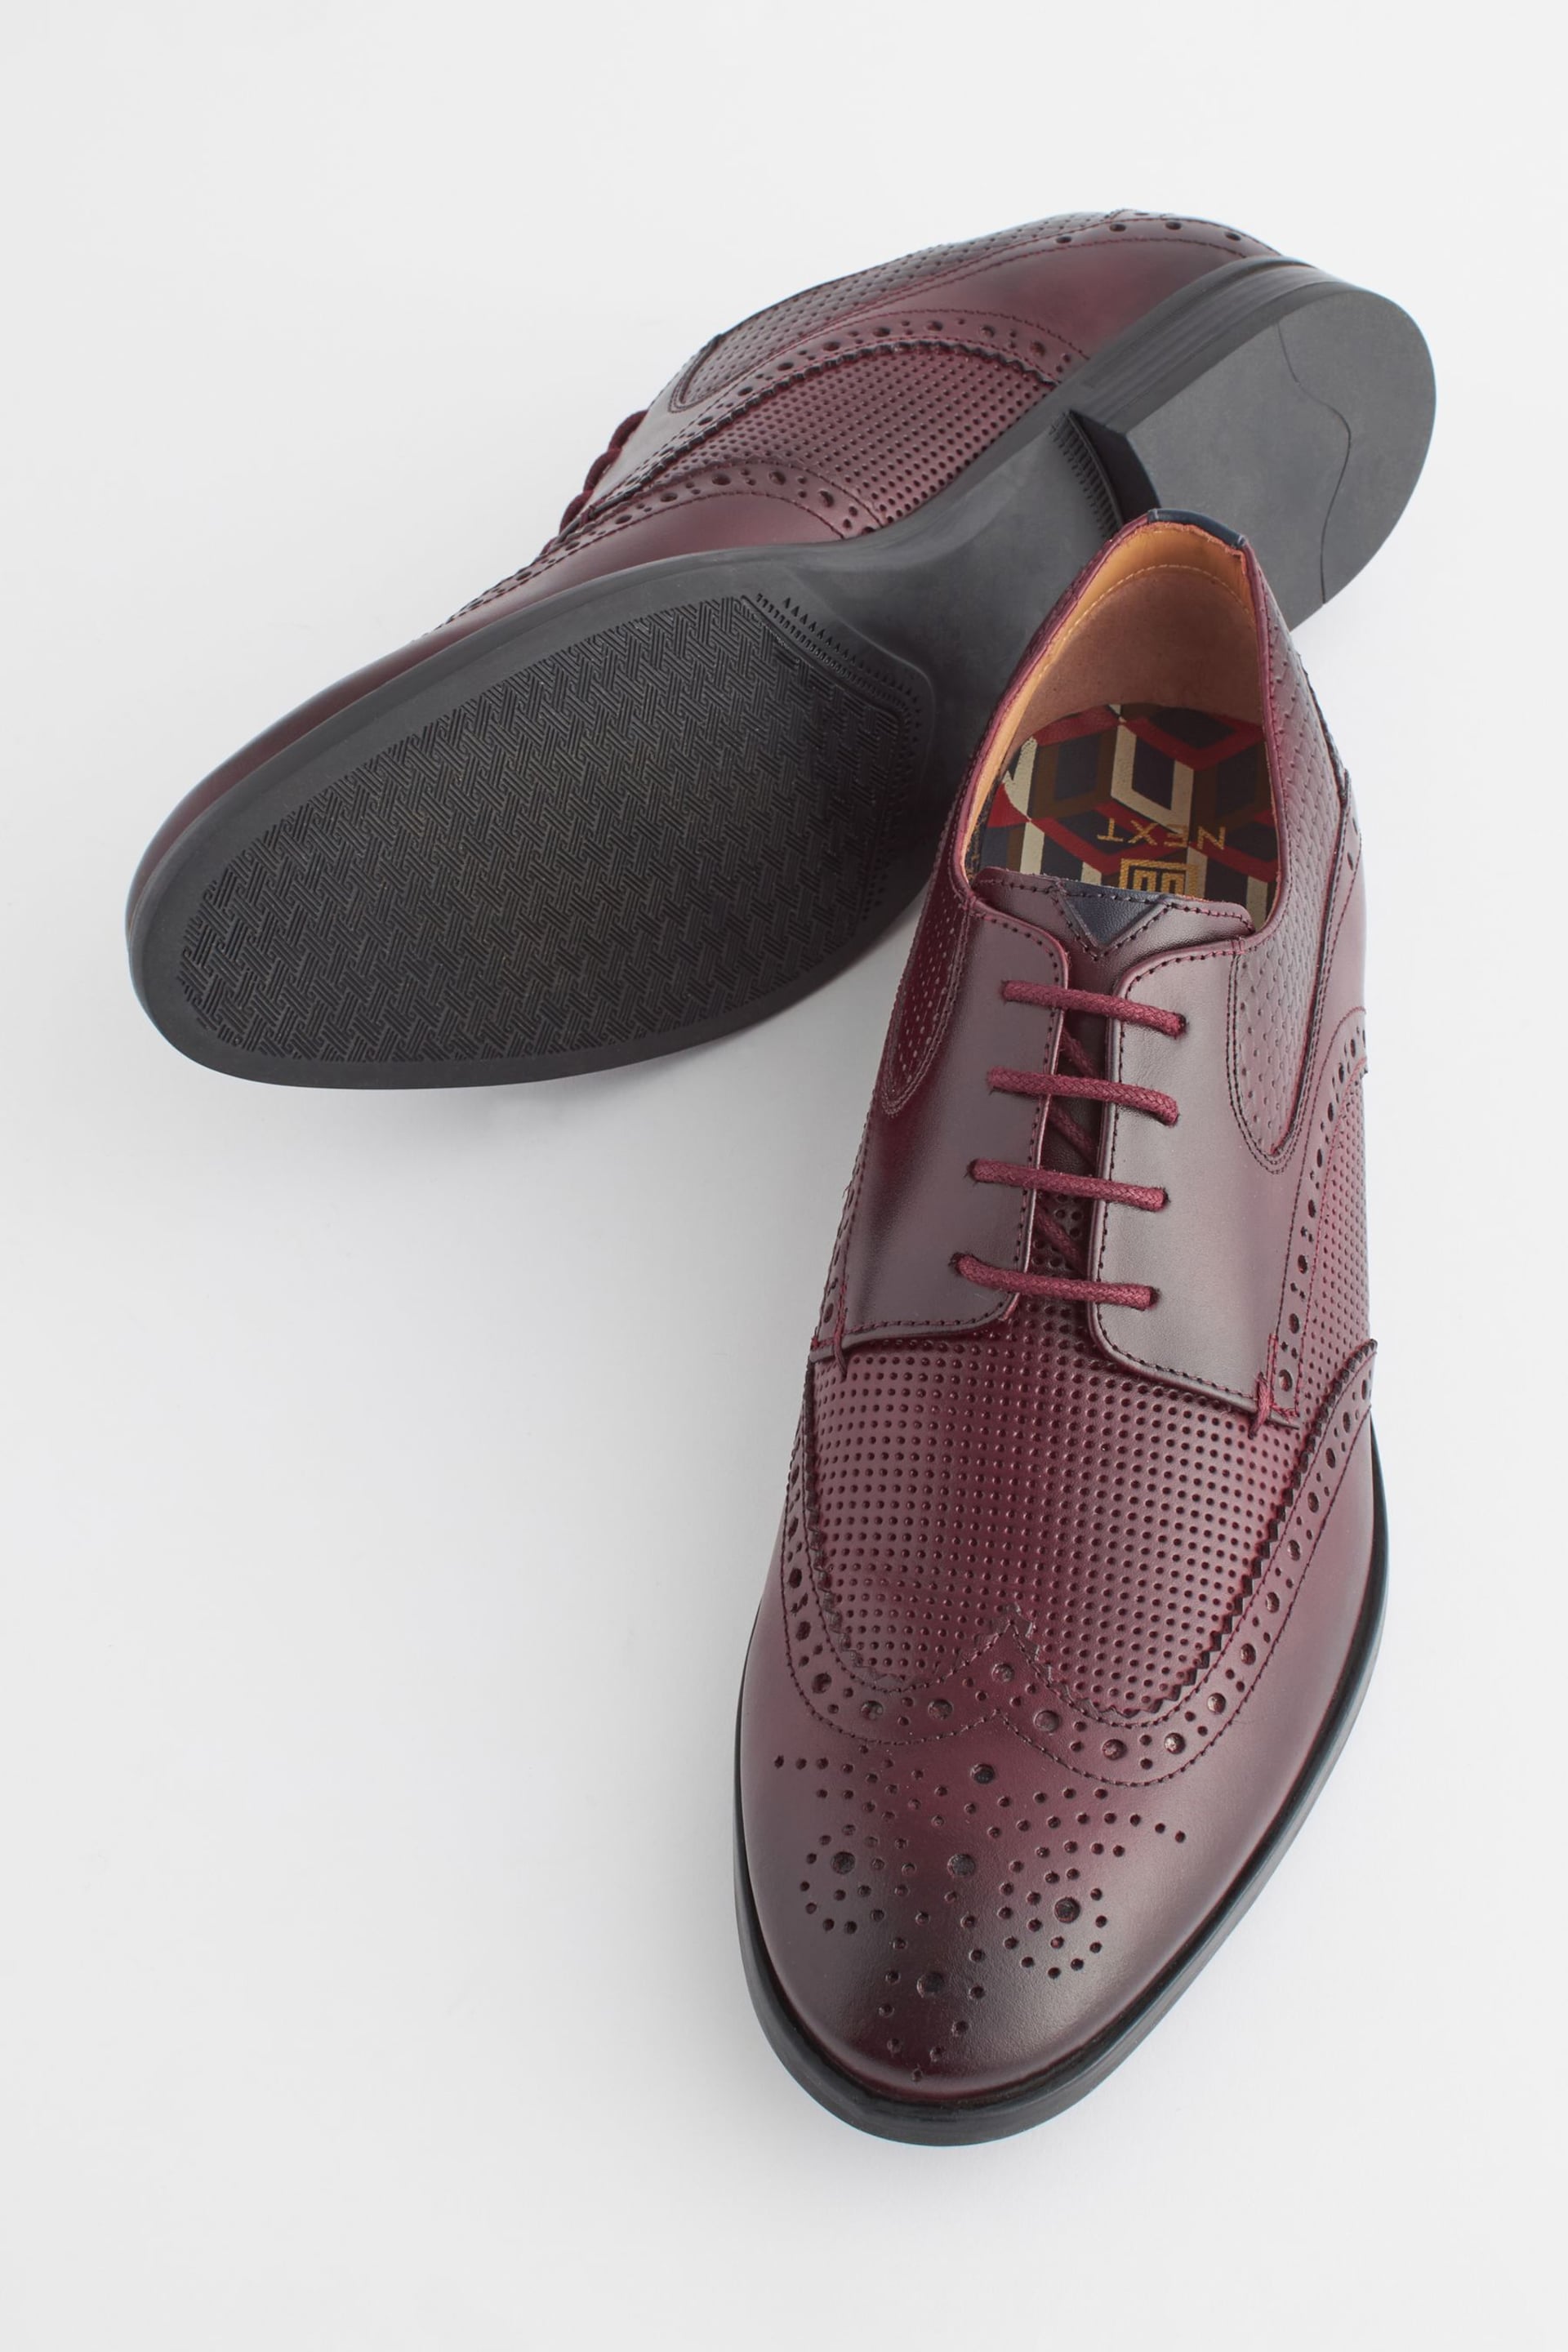 Burgundy Red Leather Embossed Wing Cap Brogues Shoes - Image 4 of 8